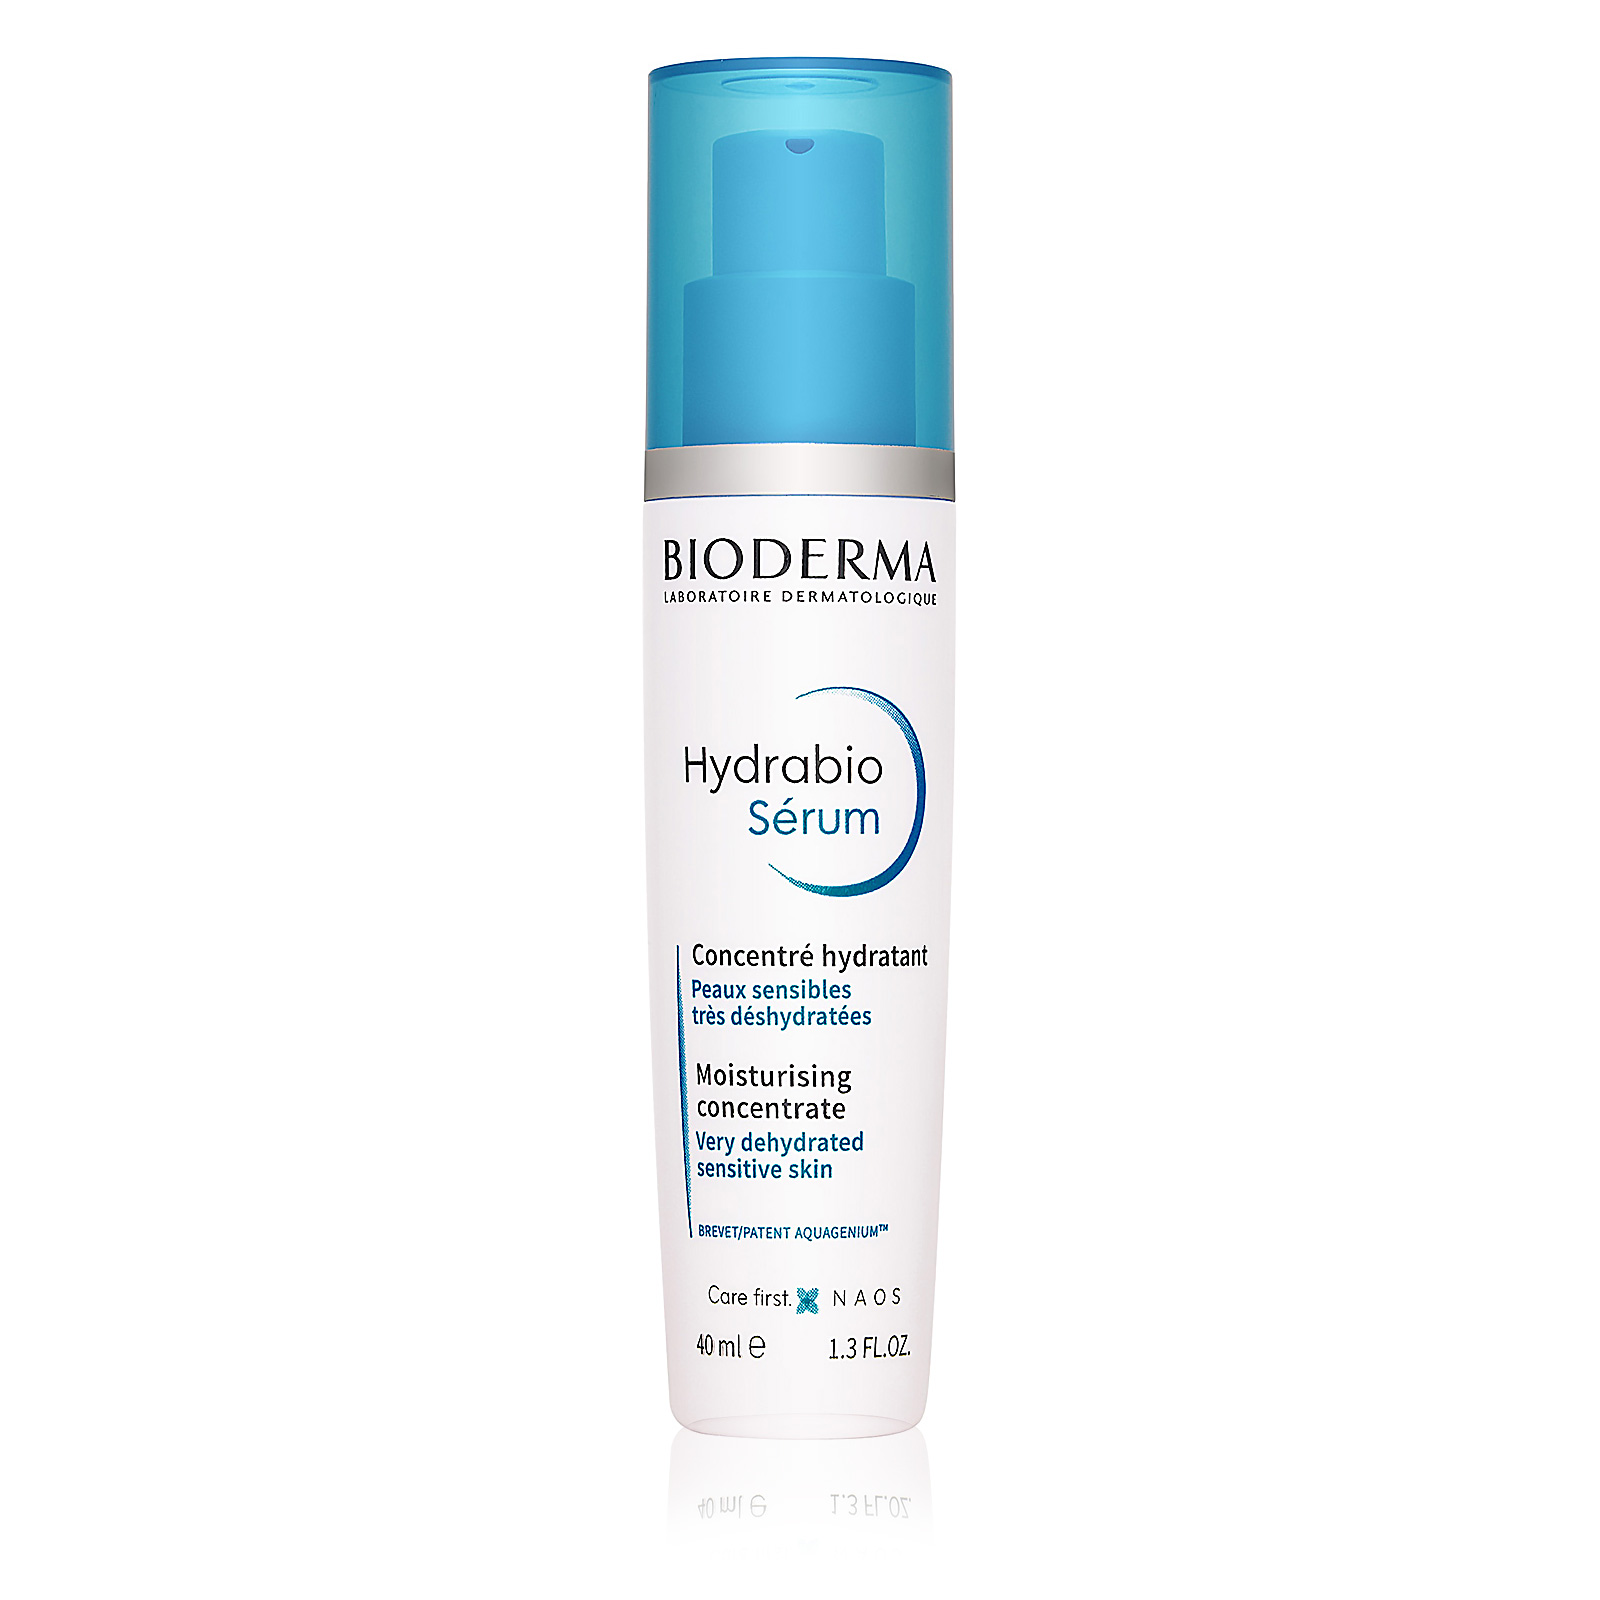 Hydrabio Moisturising Concentrate (For Very Dehydrated Sensitive Skin)